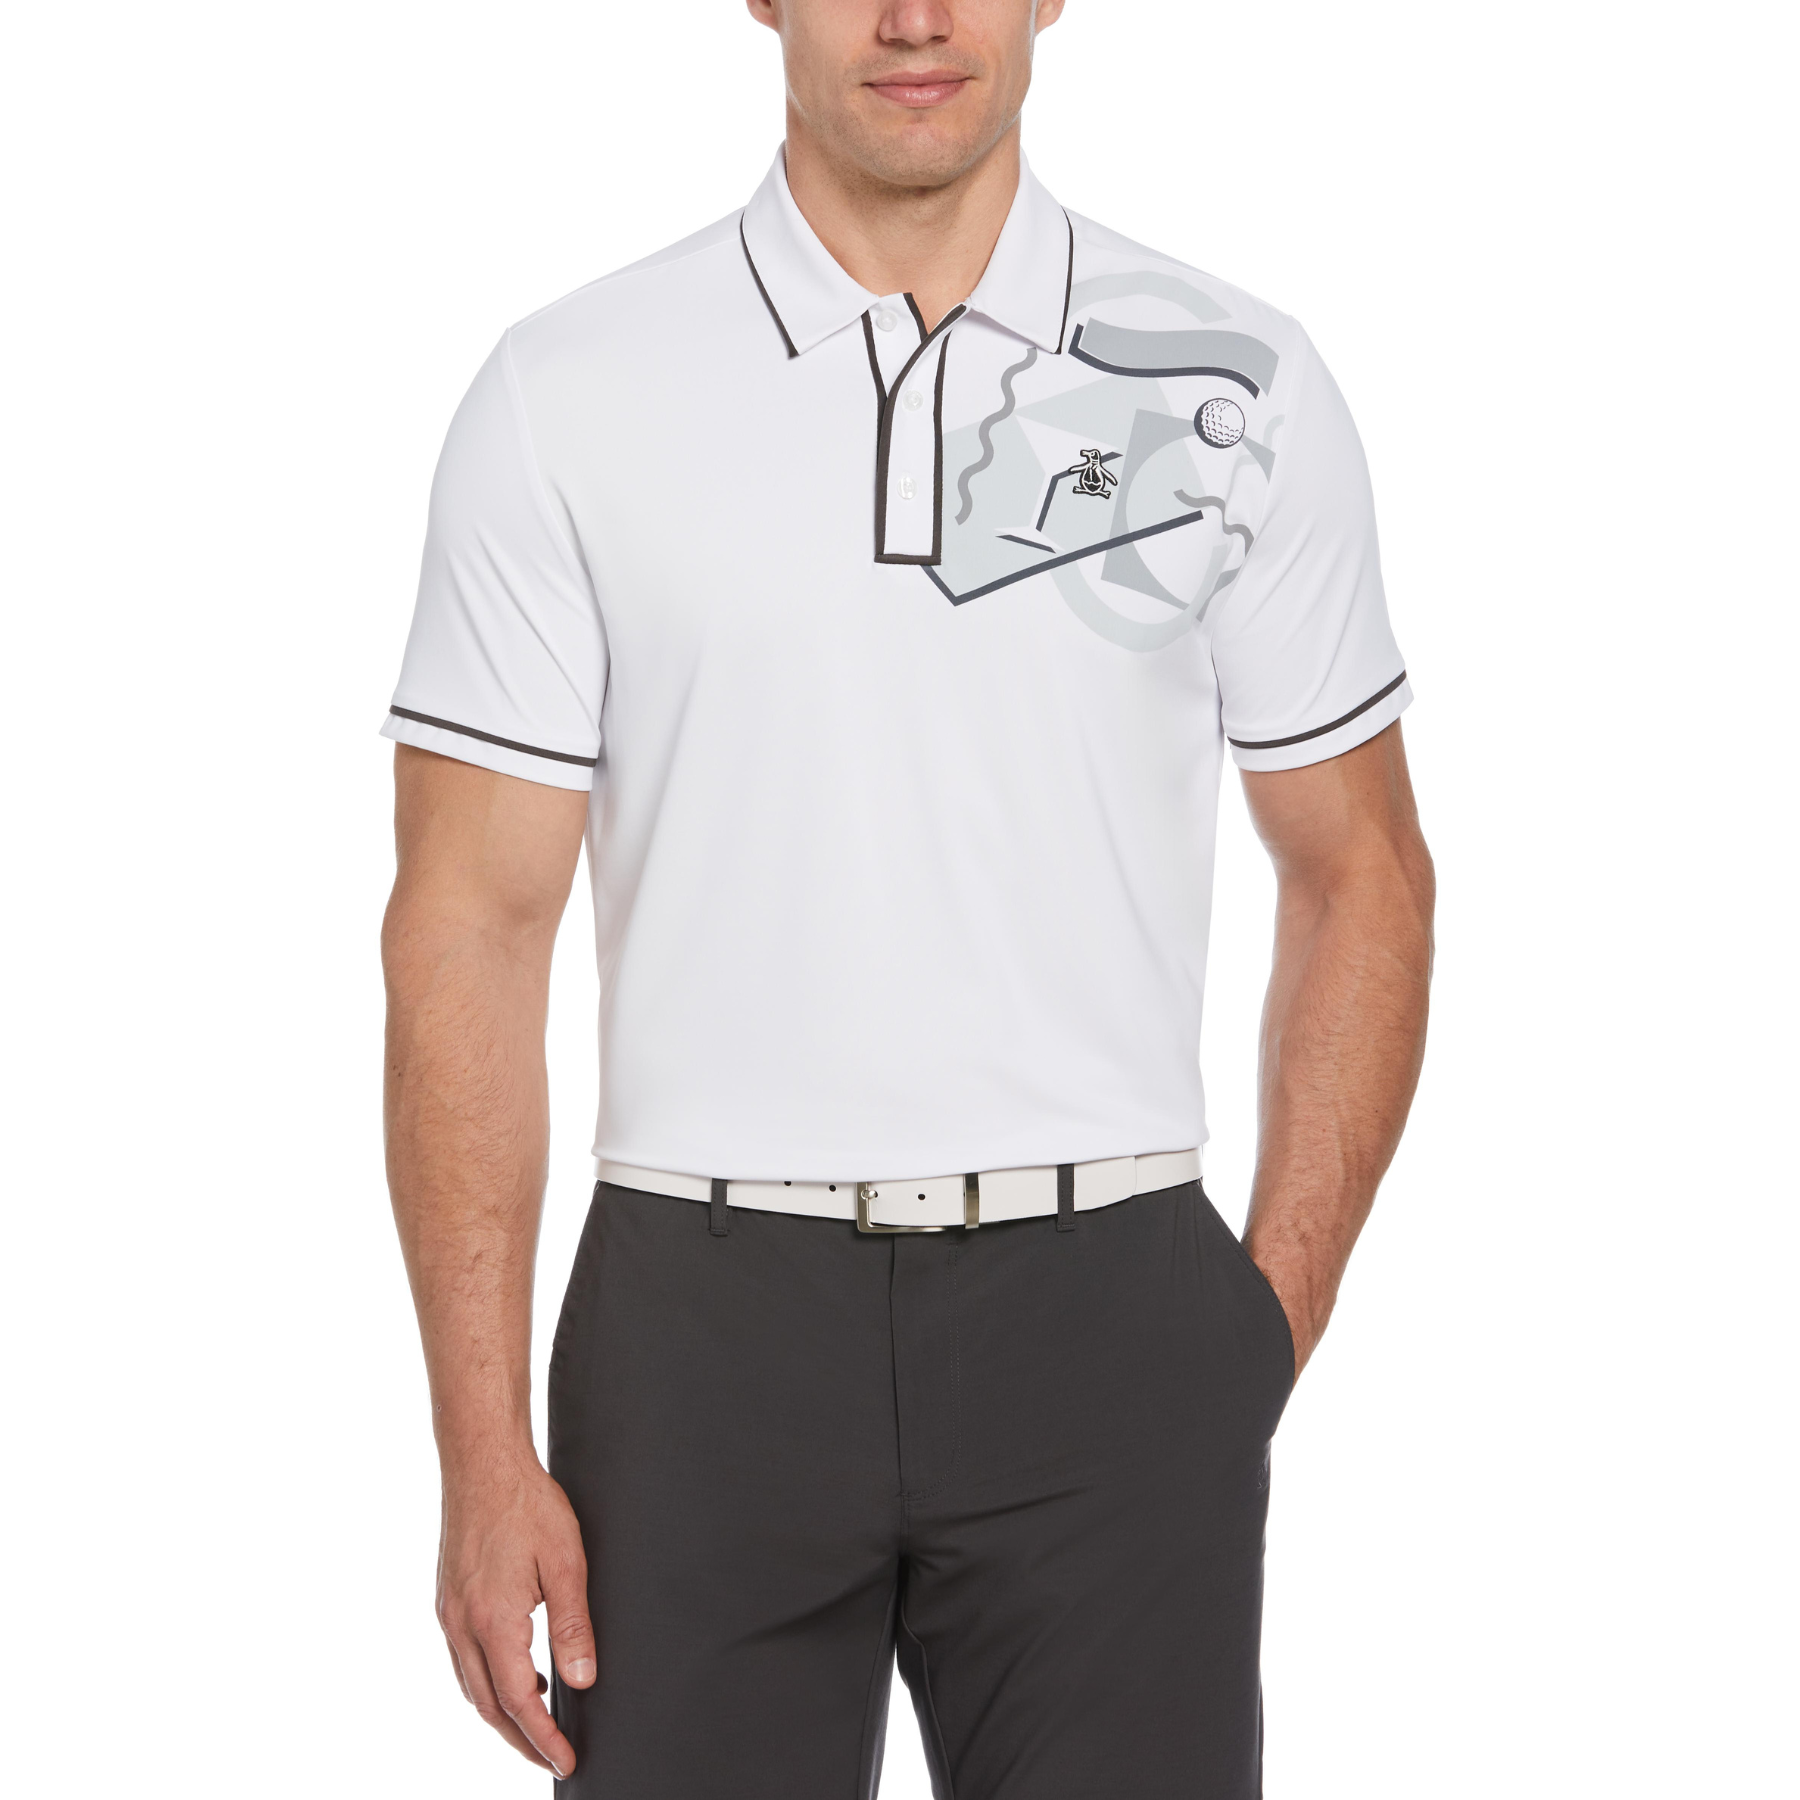 View Short Sleeve 80s Engineered Earl Golf Polo Shirt In Bright White information